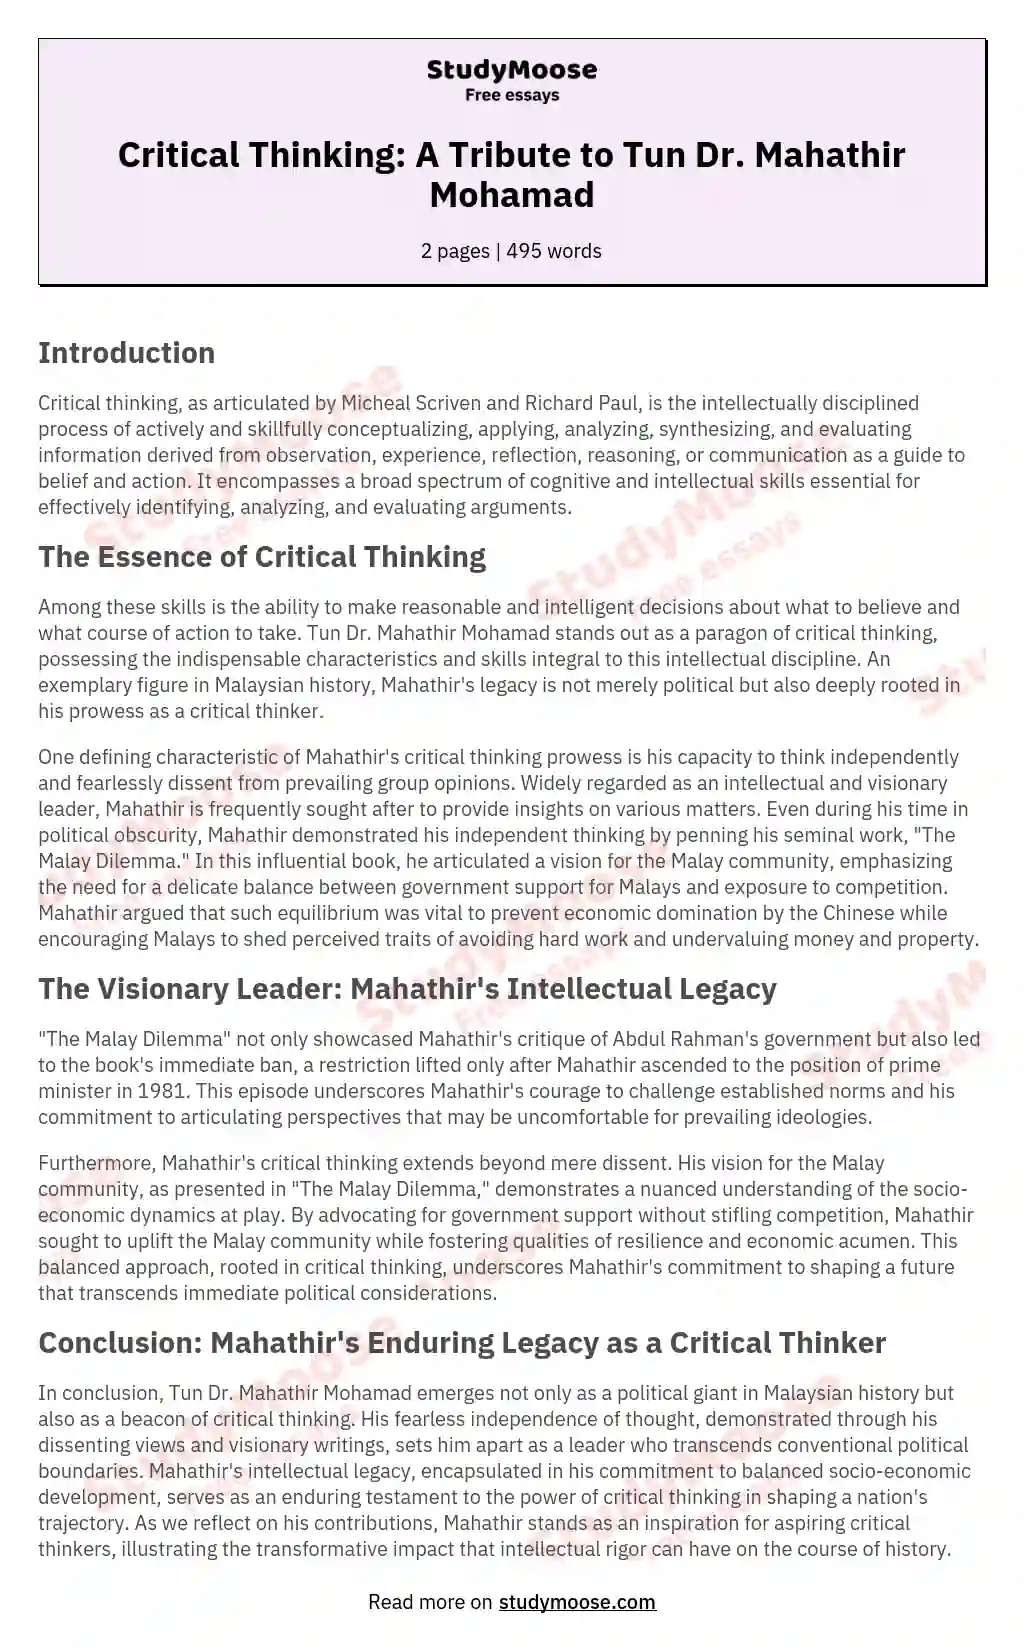 Critical Thinking: A Tribute to Tun Dr. Mahathir Mohamad essay